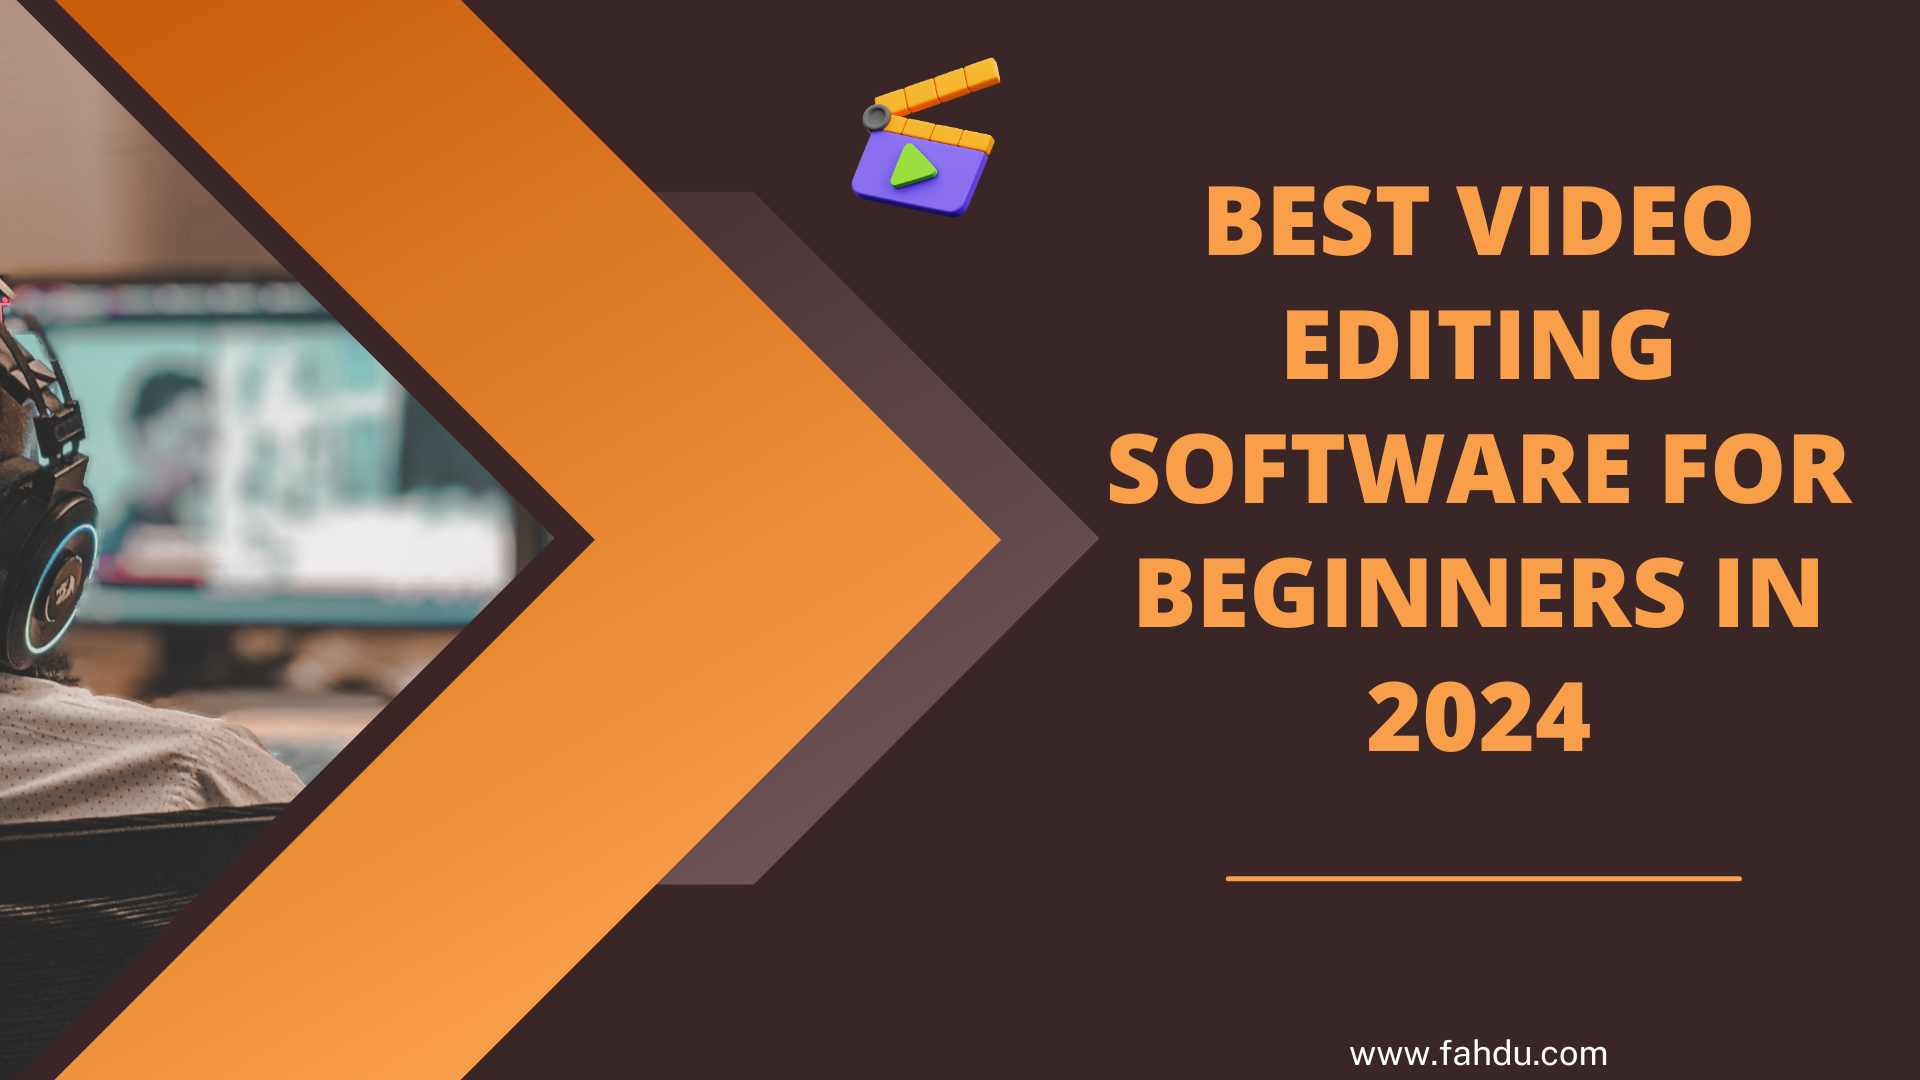 Best Video Editing Software For Beginners In 2024